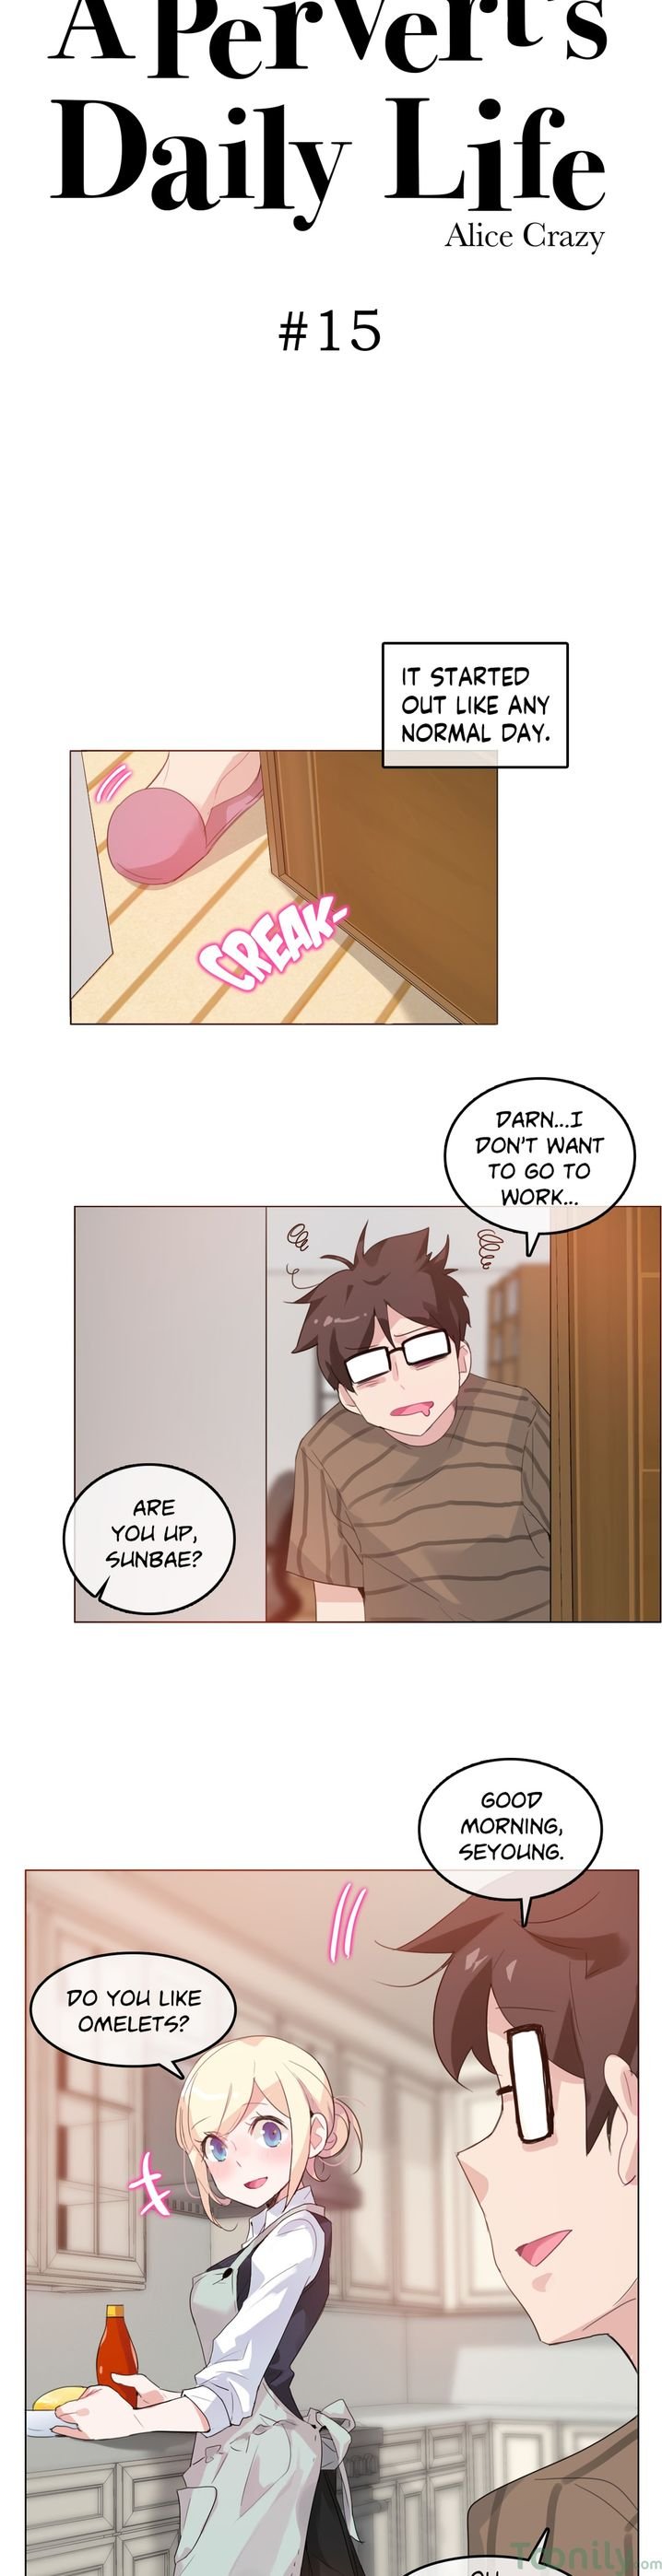 a-perverts-daily-life-chap-15-4